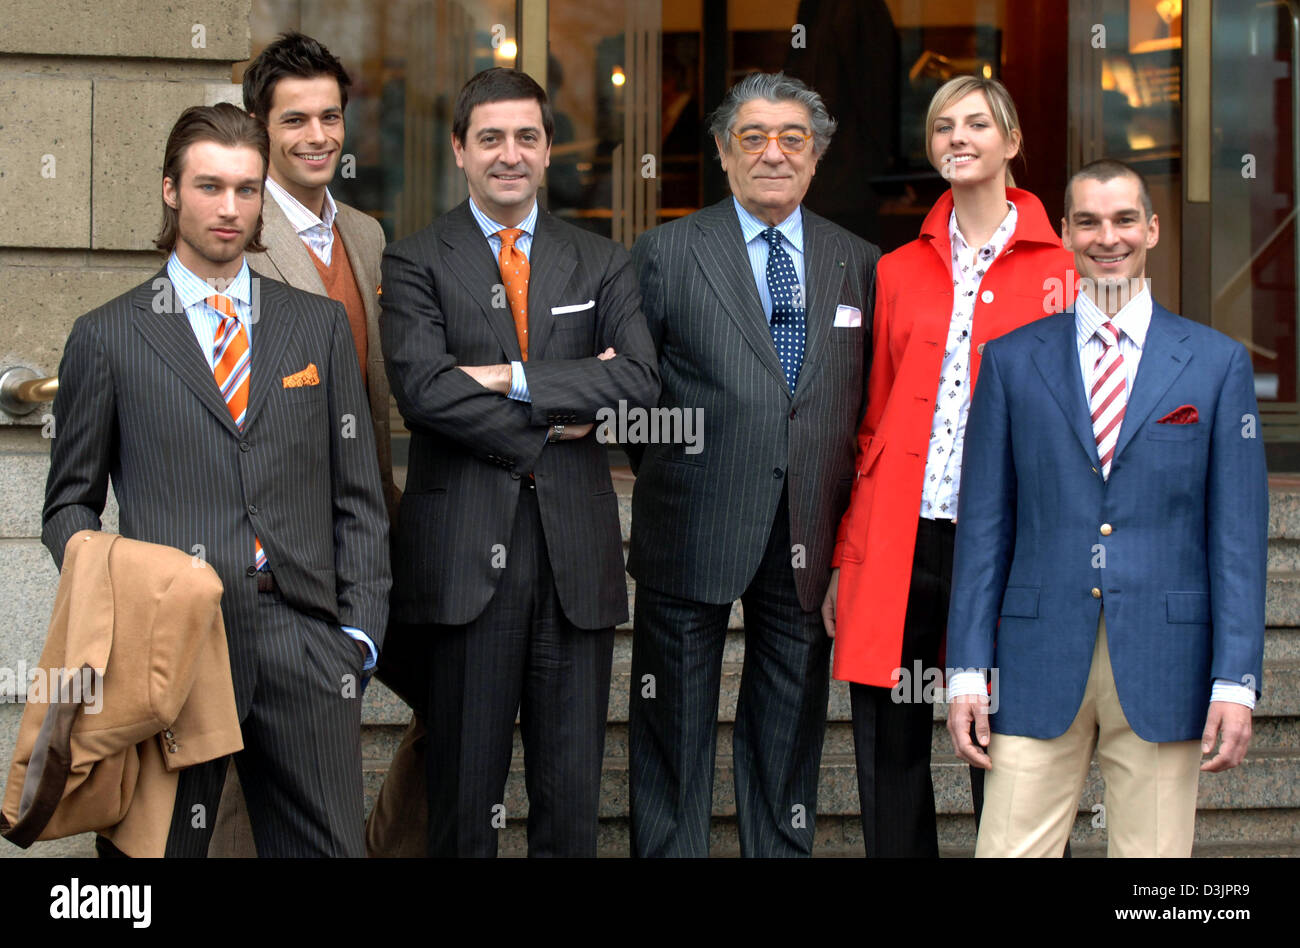 dpa) - Ciro Paone (C), owner and founder of Italian fashion company Kiton,  gives the thumbs up sign while he presents together with Antonio de Matteis  (3rd from L), the company's chief